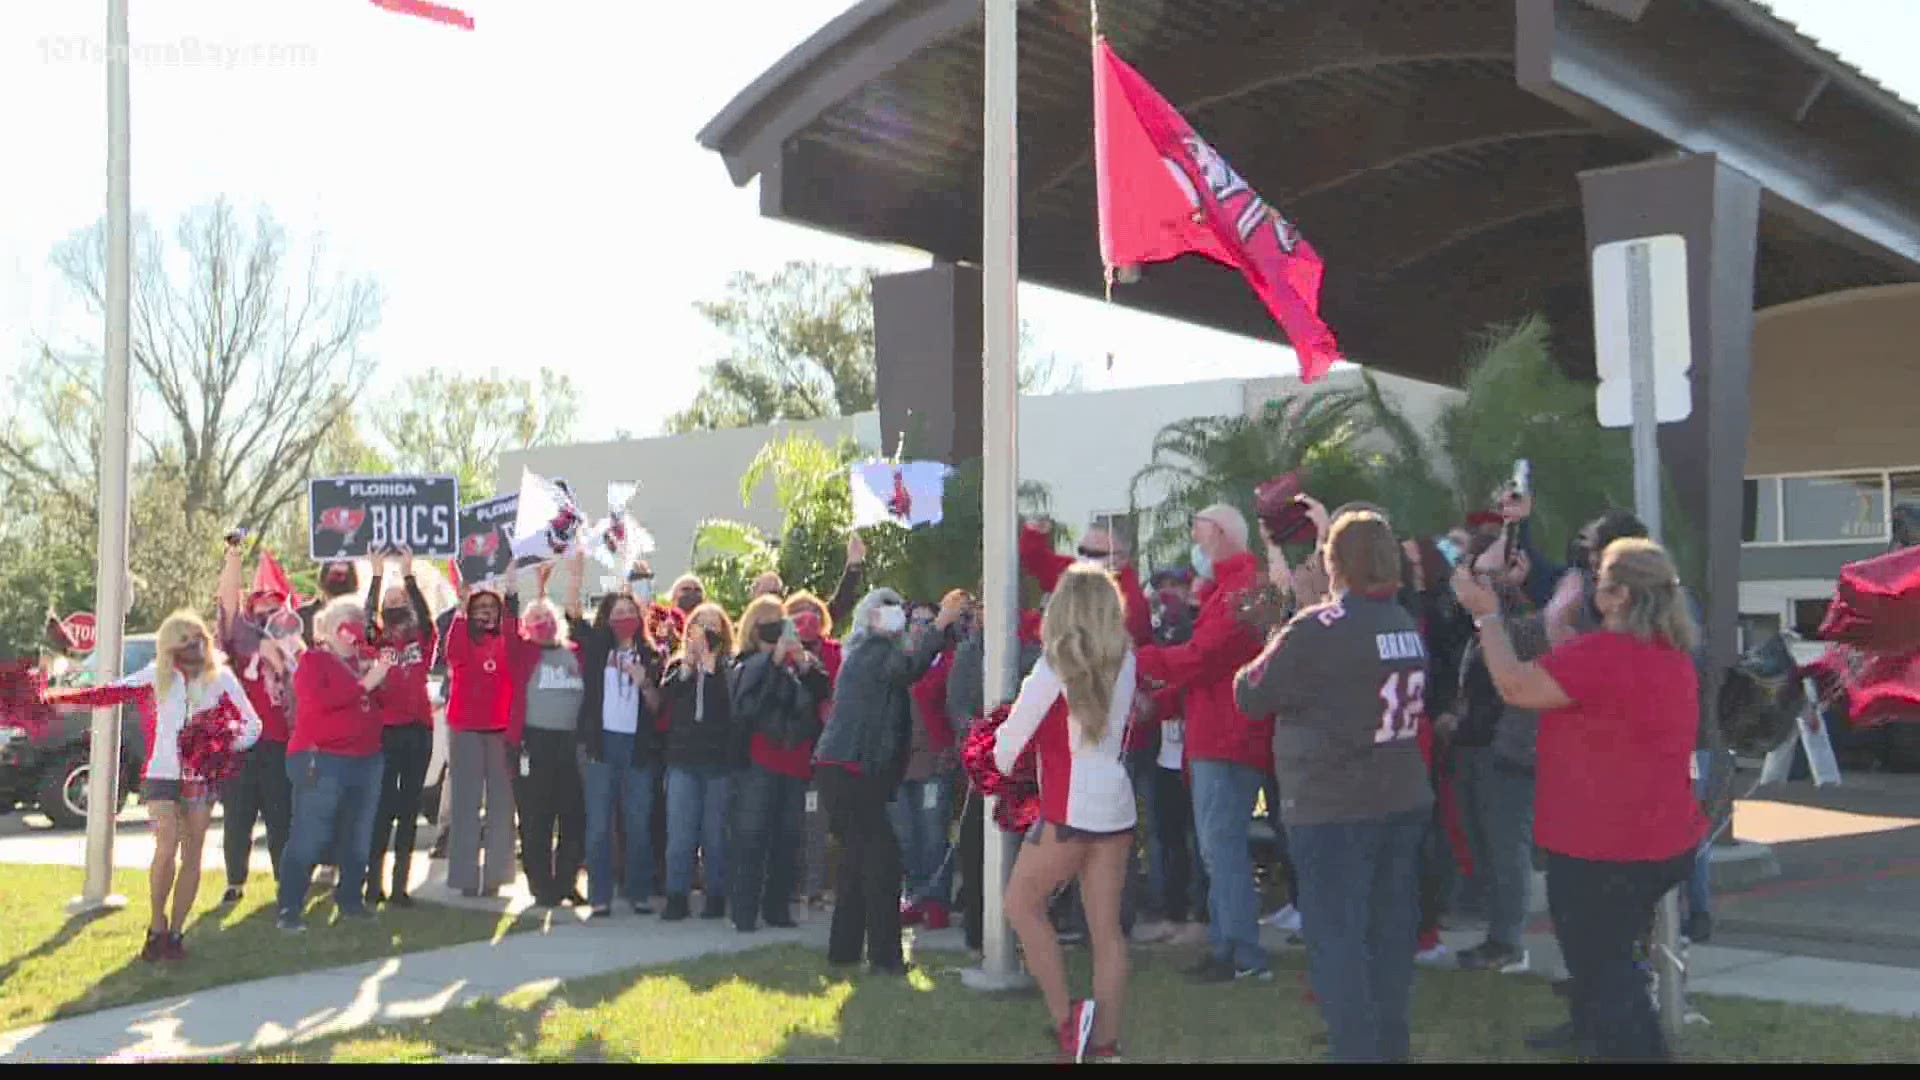 Leaders in the Tampa Bay area are flying Bucs flags ahead of Super Bowl LV.